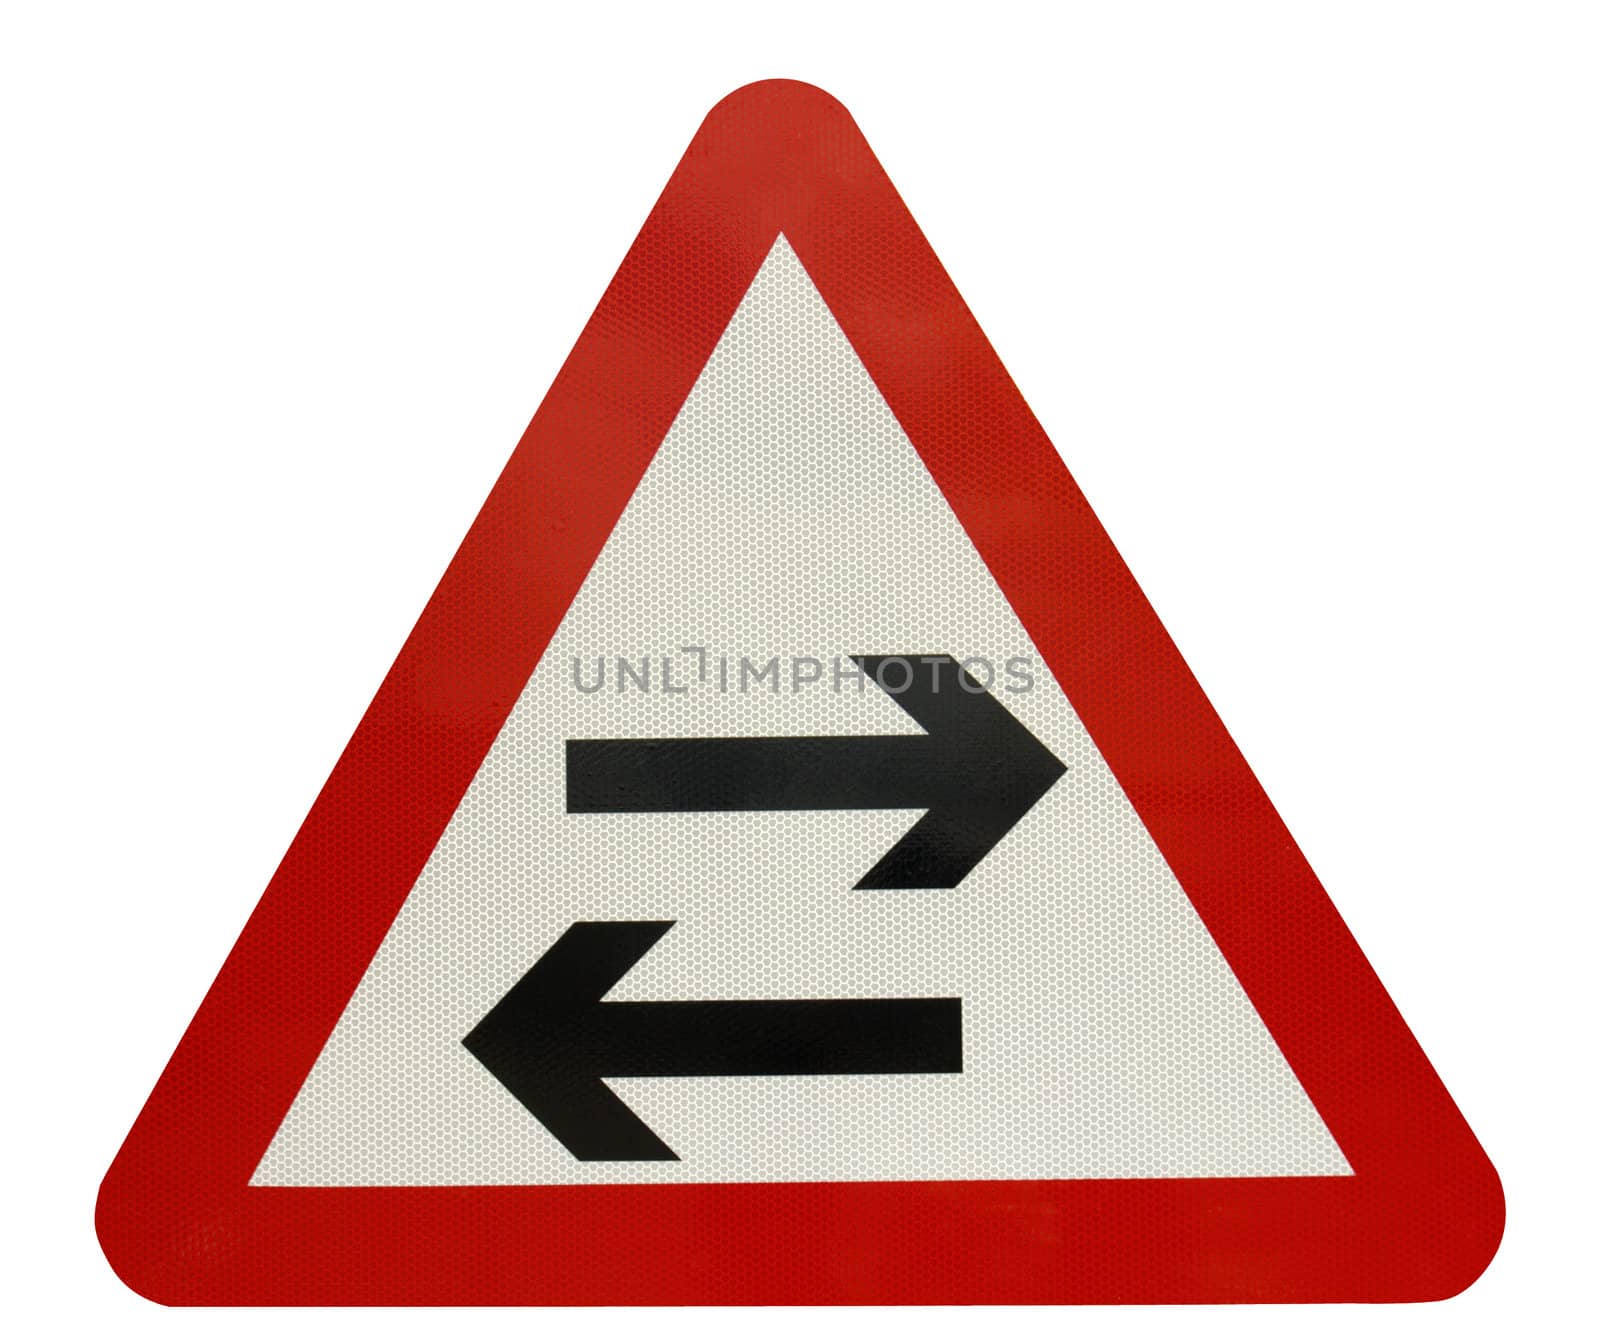 A two-way sign, arrows pointing in opposite directions, on a white background. Clipping path included.